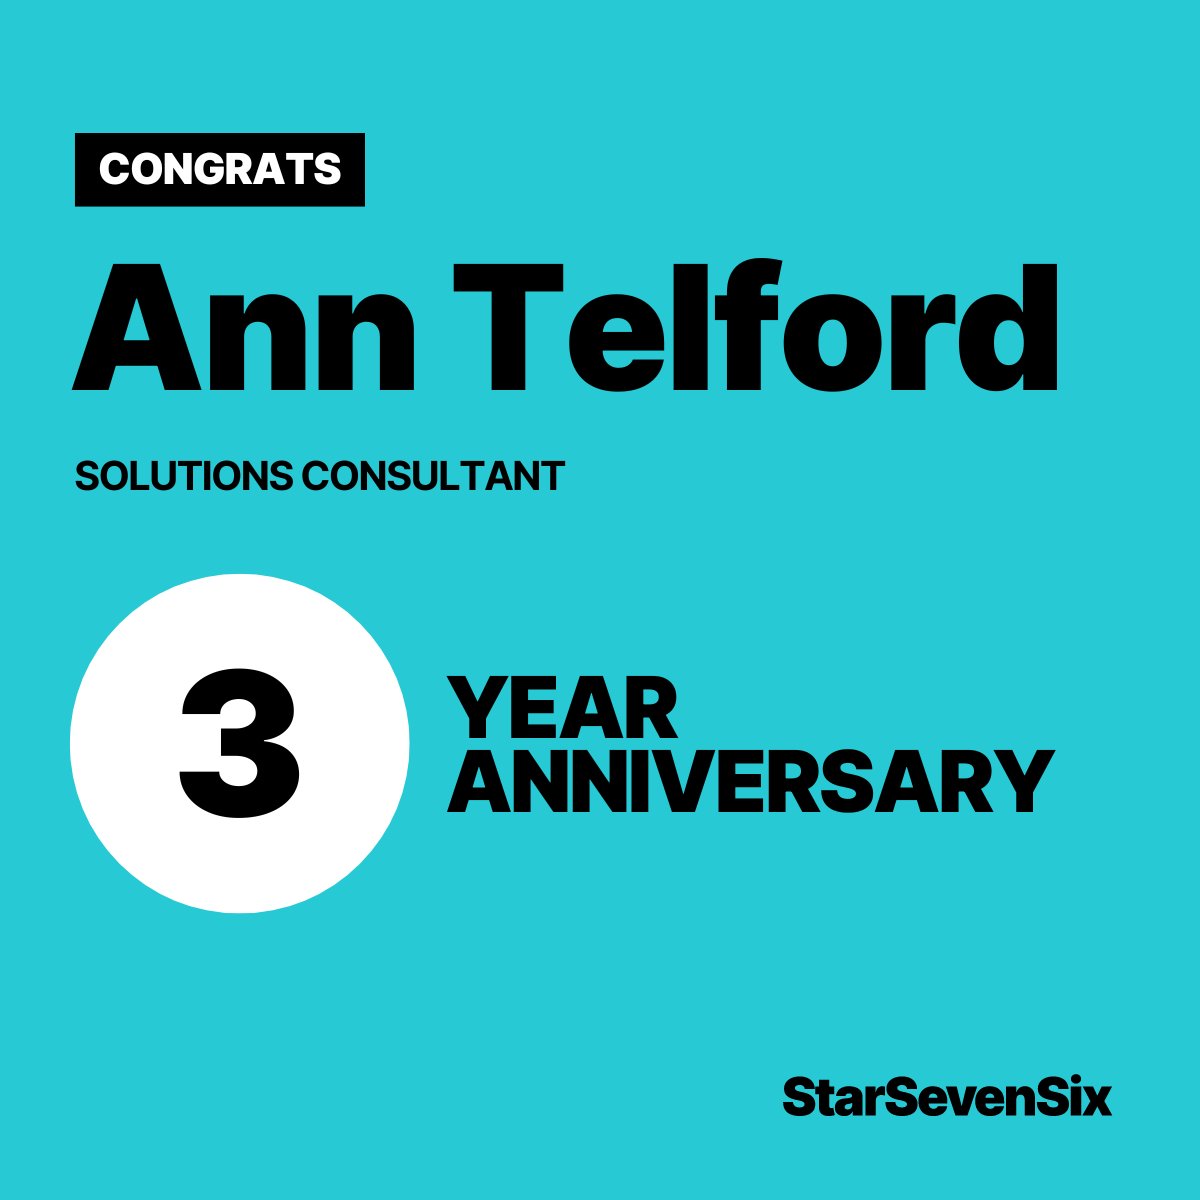 Join us in congratulating Ann Telford on 3 years at Star Seven Six! 🎉 ✨

#Culture #GreatPlacesToWork #WorkplaceCommunity #FindYOurPassion #StarSevenSix